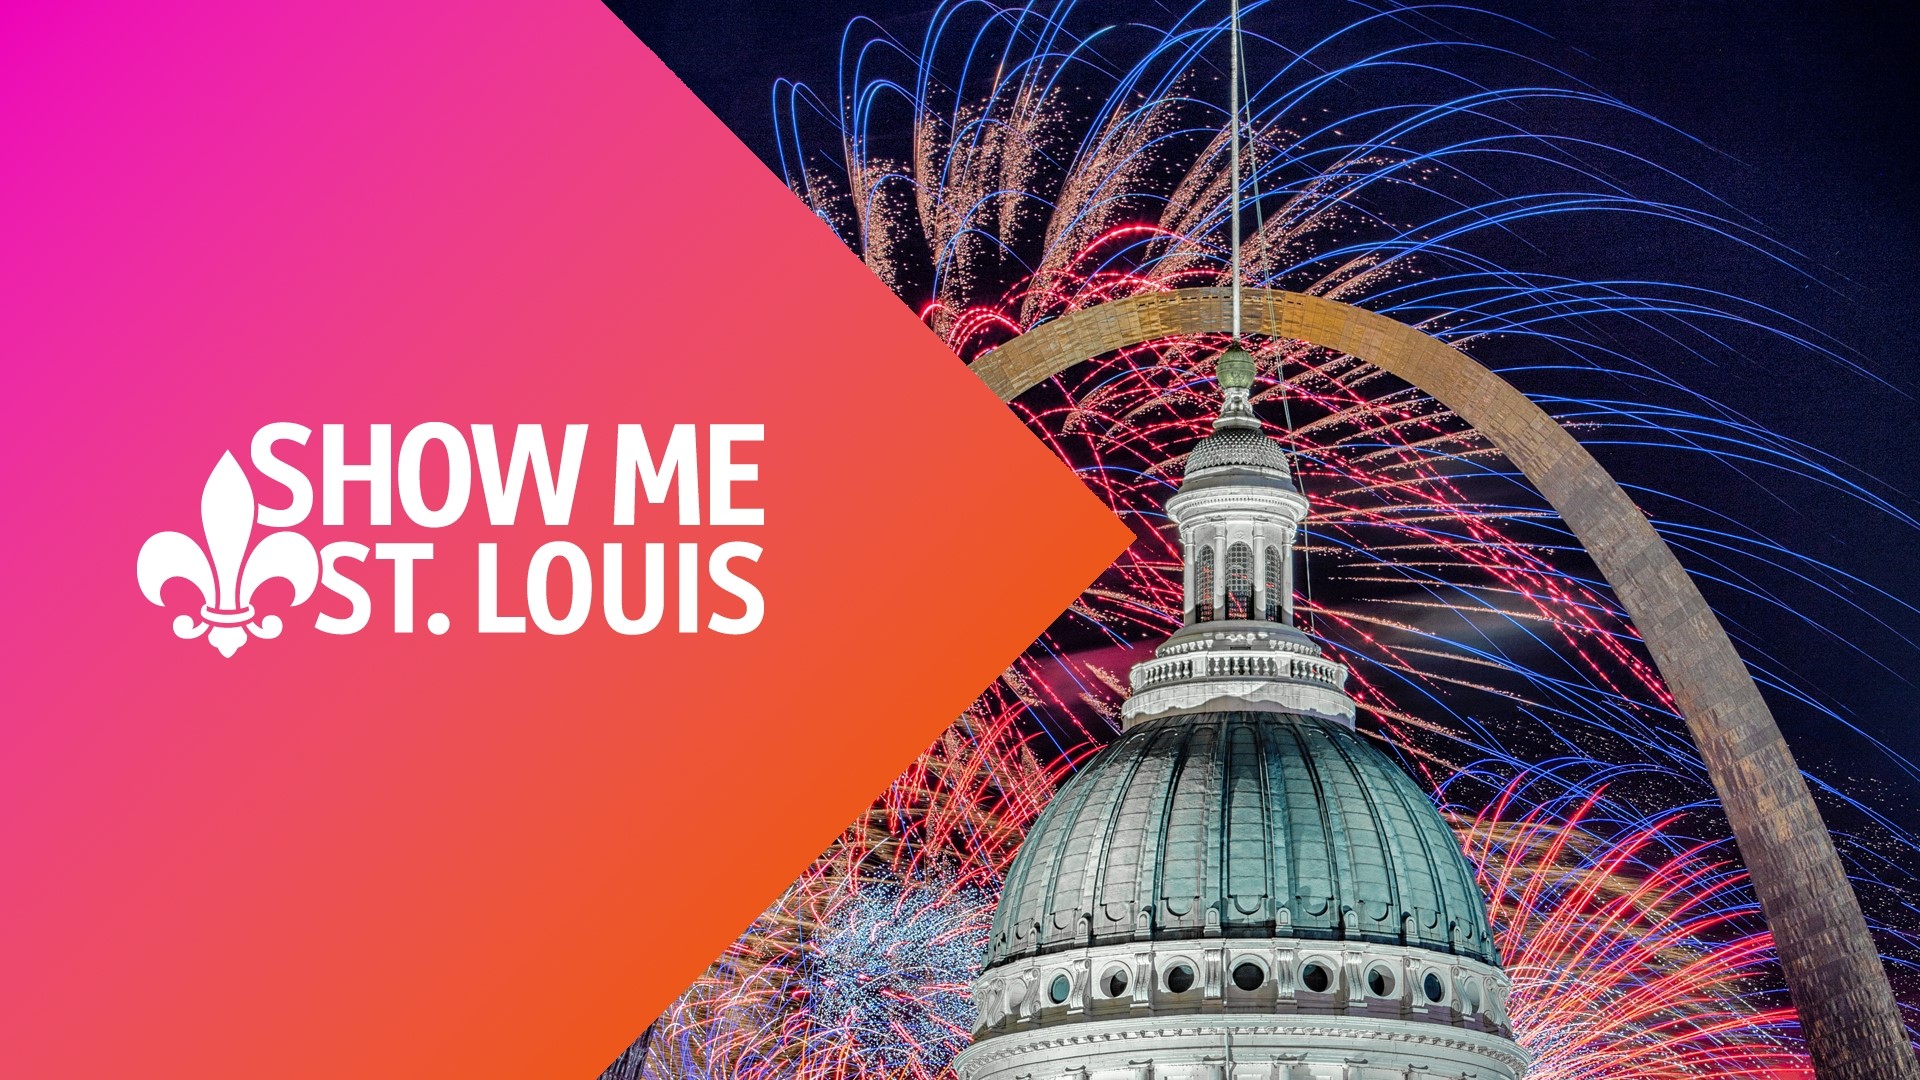 St. Louis' longest running live and local lifestyle show. Consider us your guide to everything St. Louis. Featuring hidden gems, interesting people & what's new.